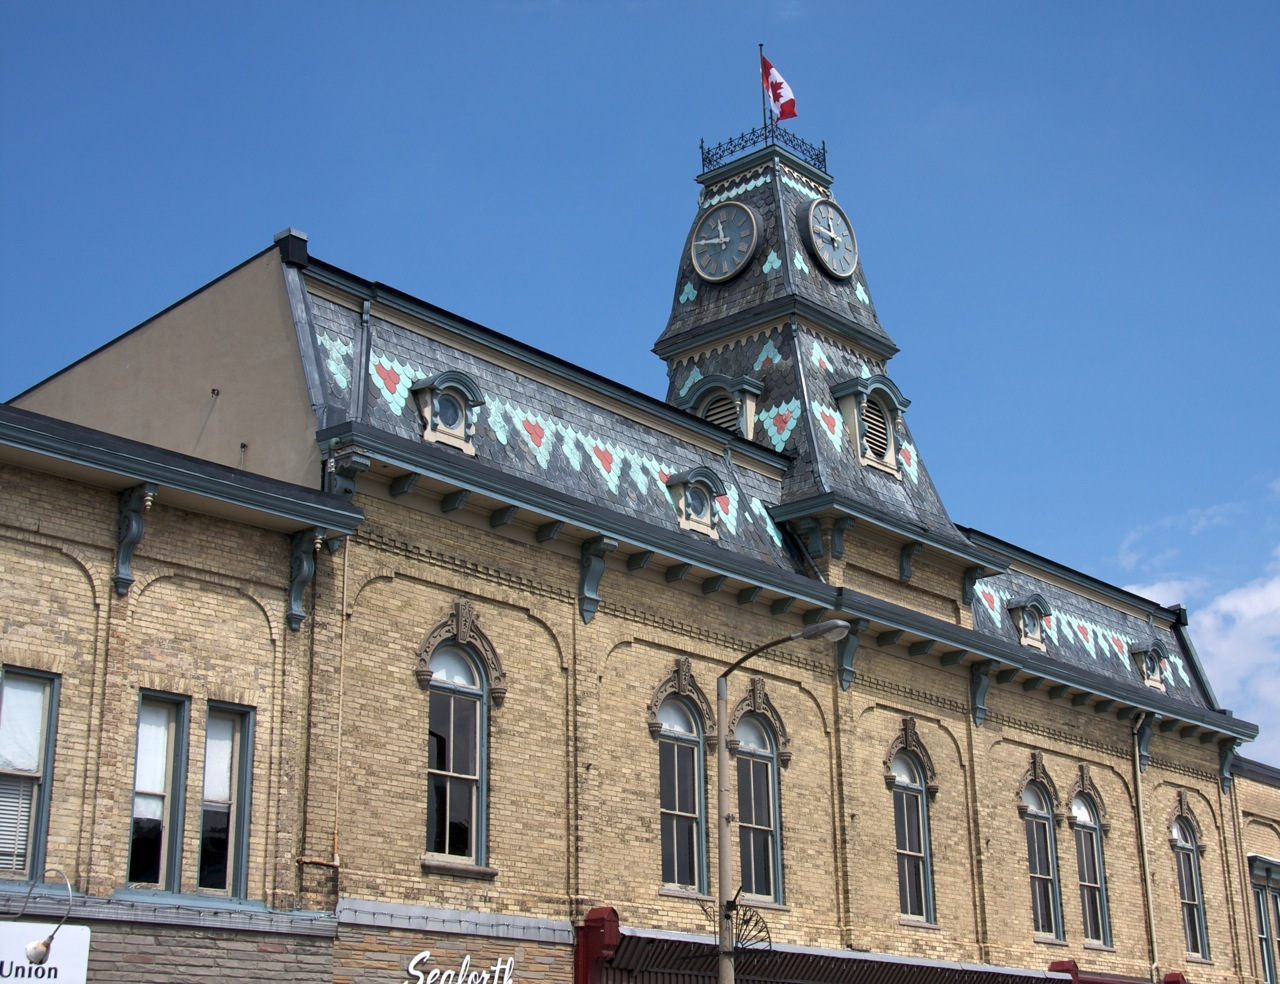 a0b6f-cardno_opera_hall_in_middle_of_the_seaforth_bia_historic_downtown.jpg